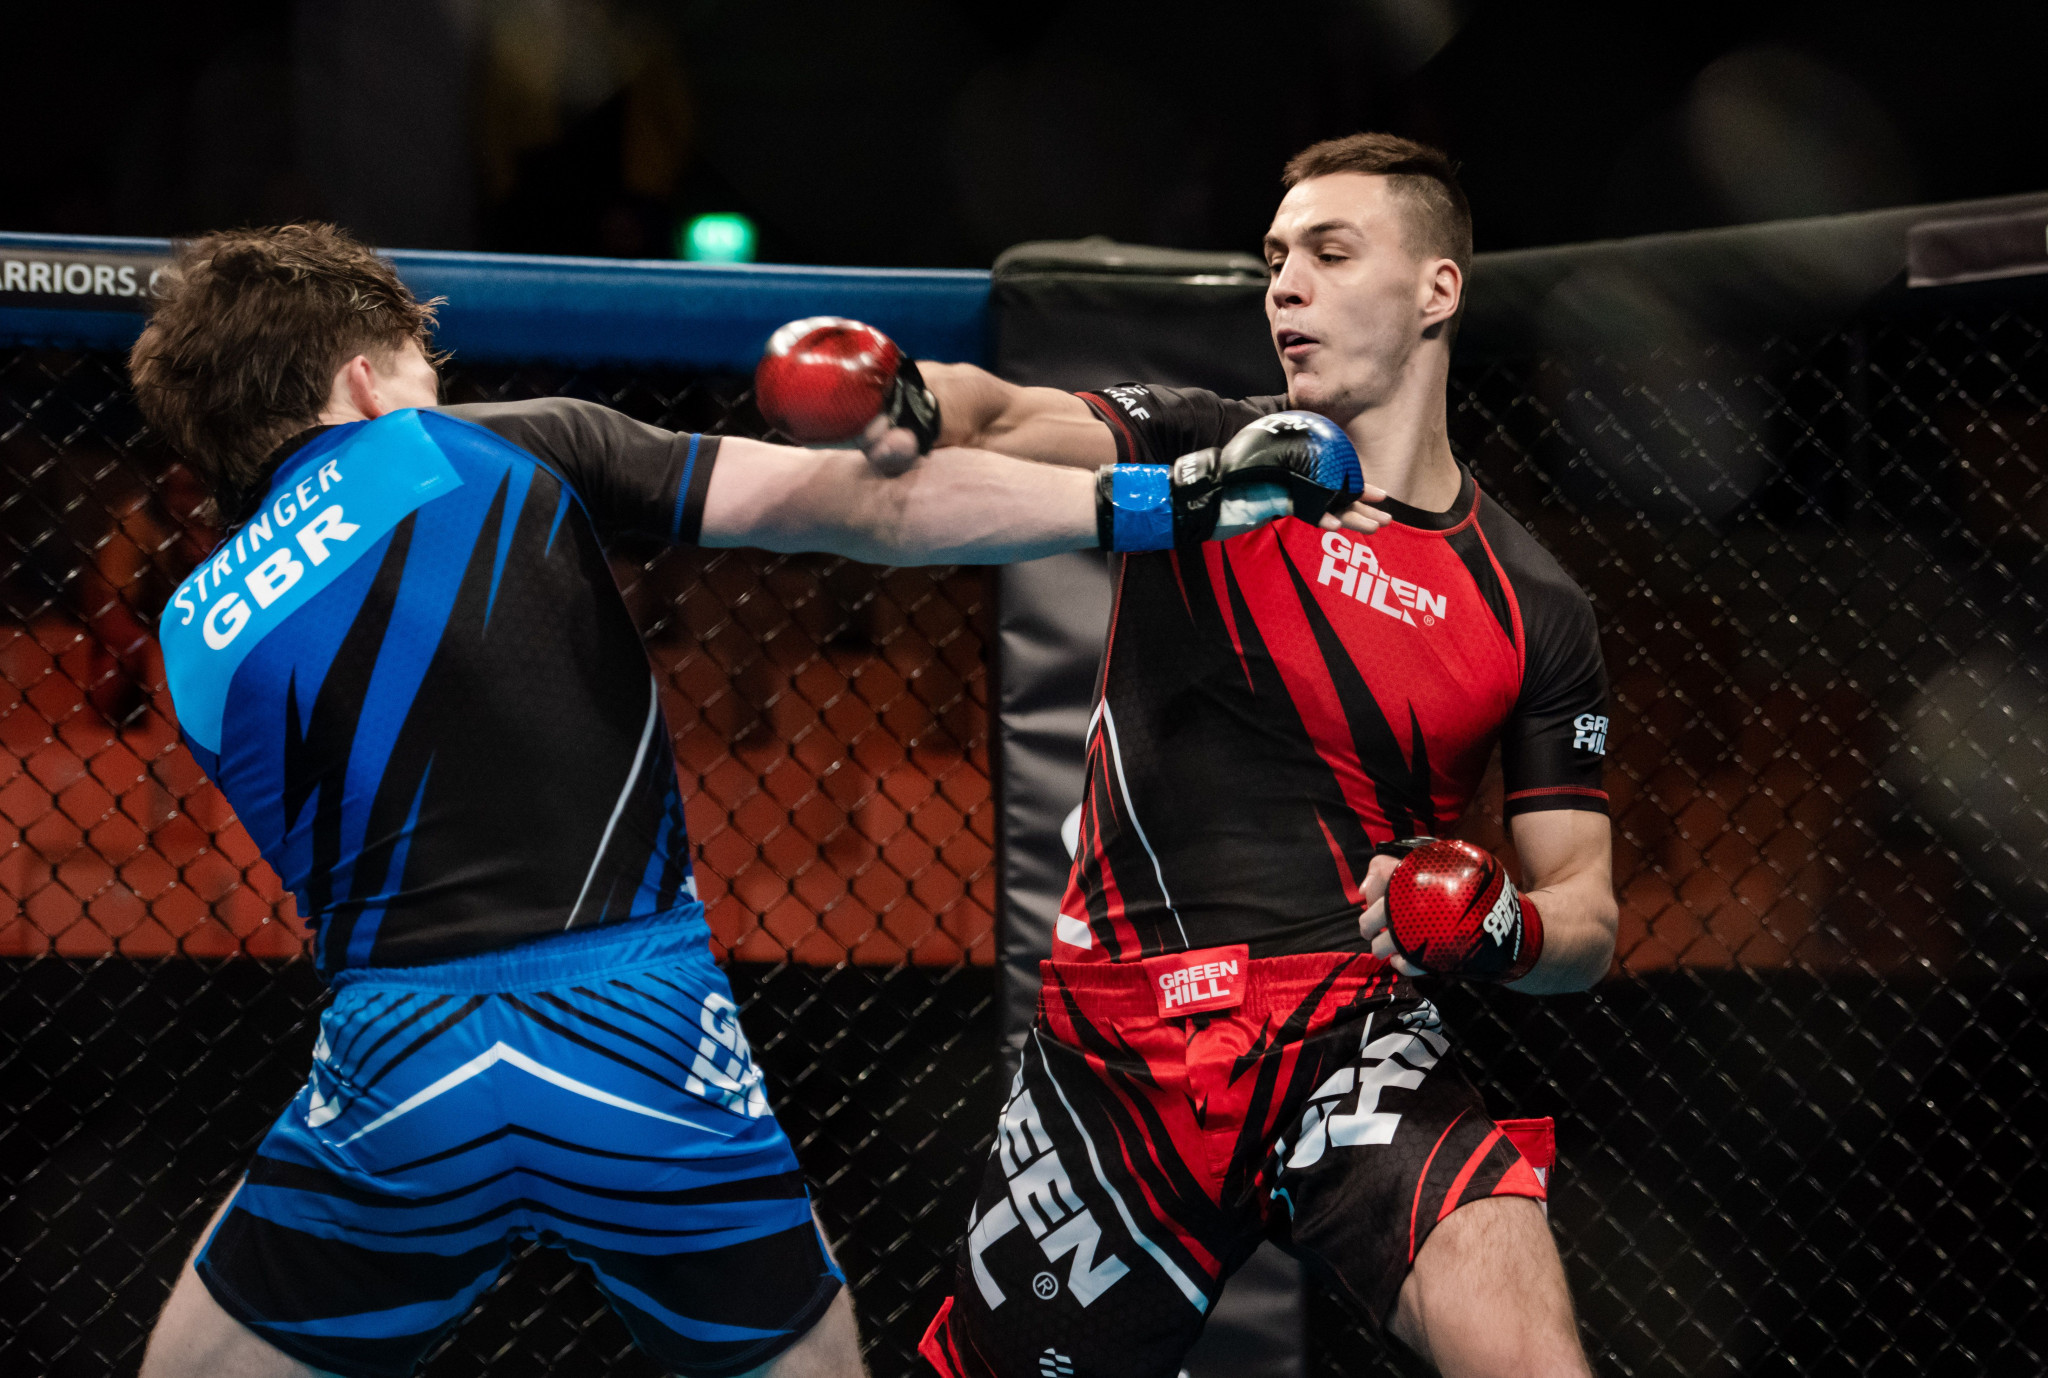 England’s Teddy Stringer overcame two submission attempts to go through against Czech Vaclav Zemla at welterweight ©IMMAF